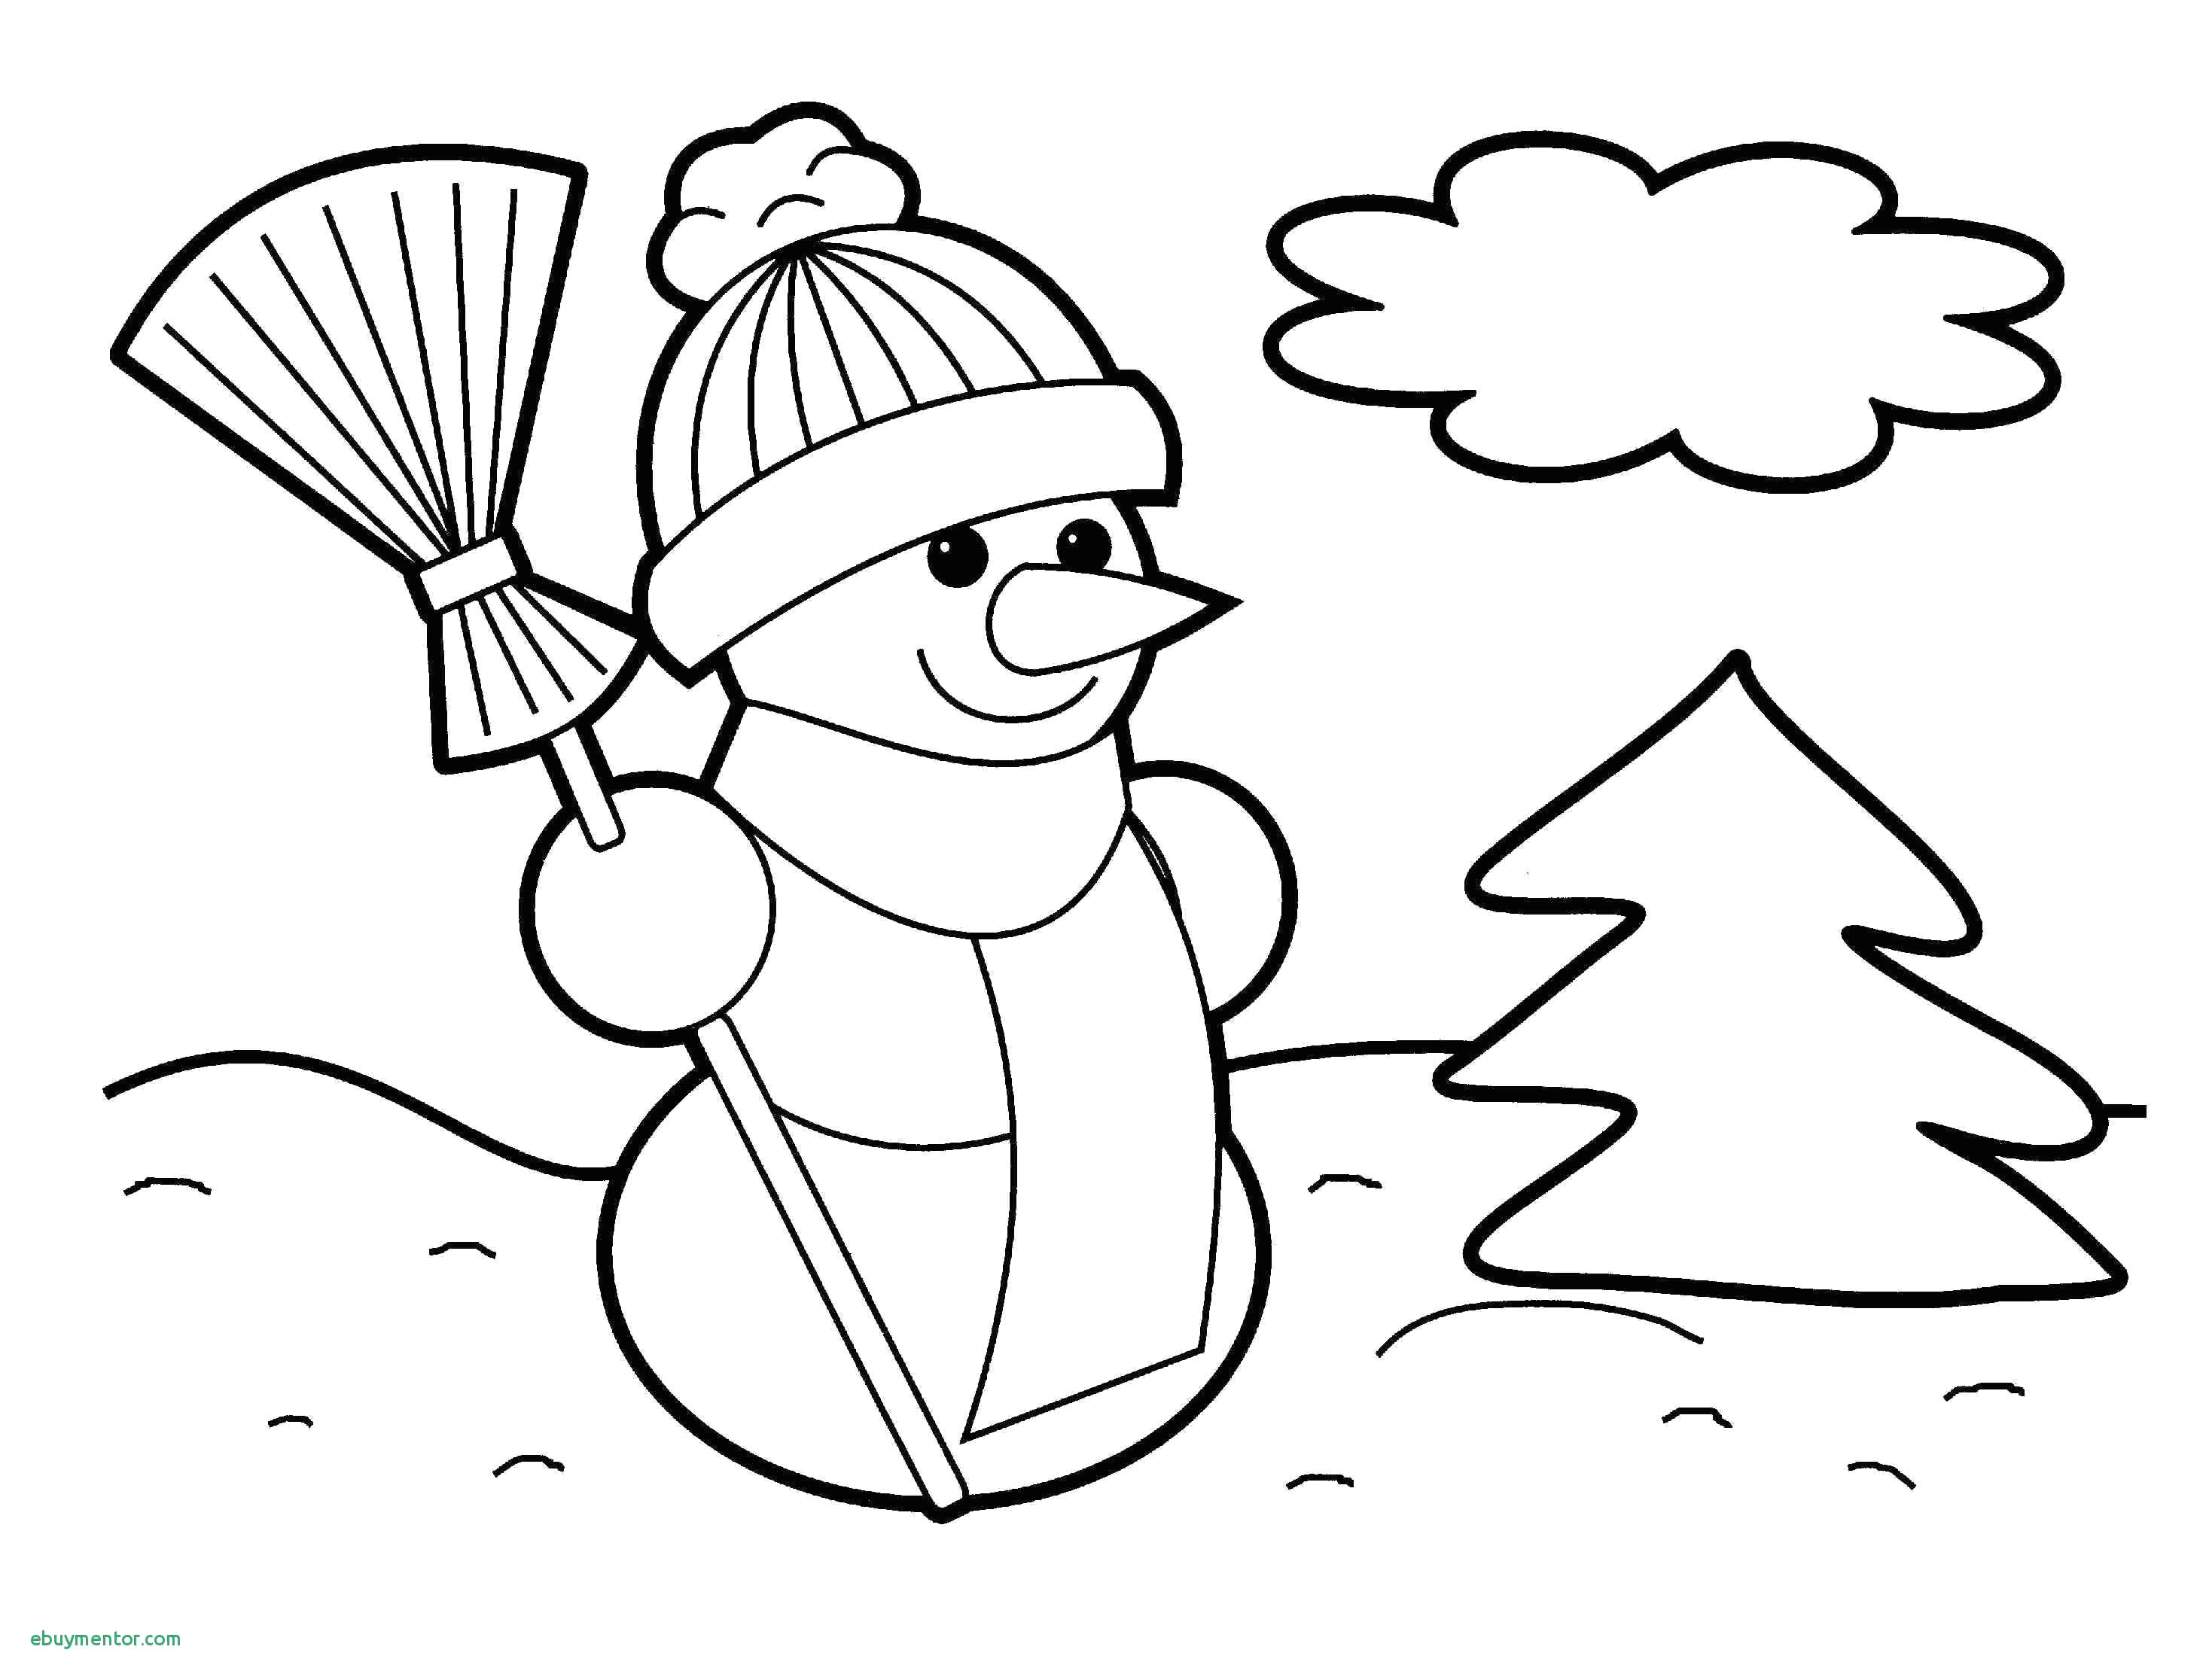 very cool coloring pages best of free coloring pages christmas dog unique cool od dog coloring